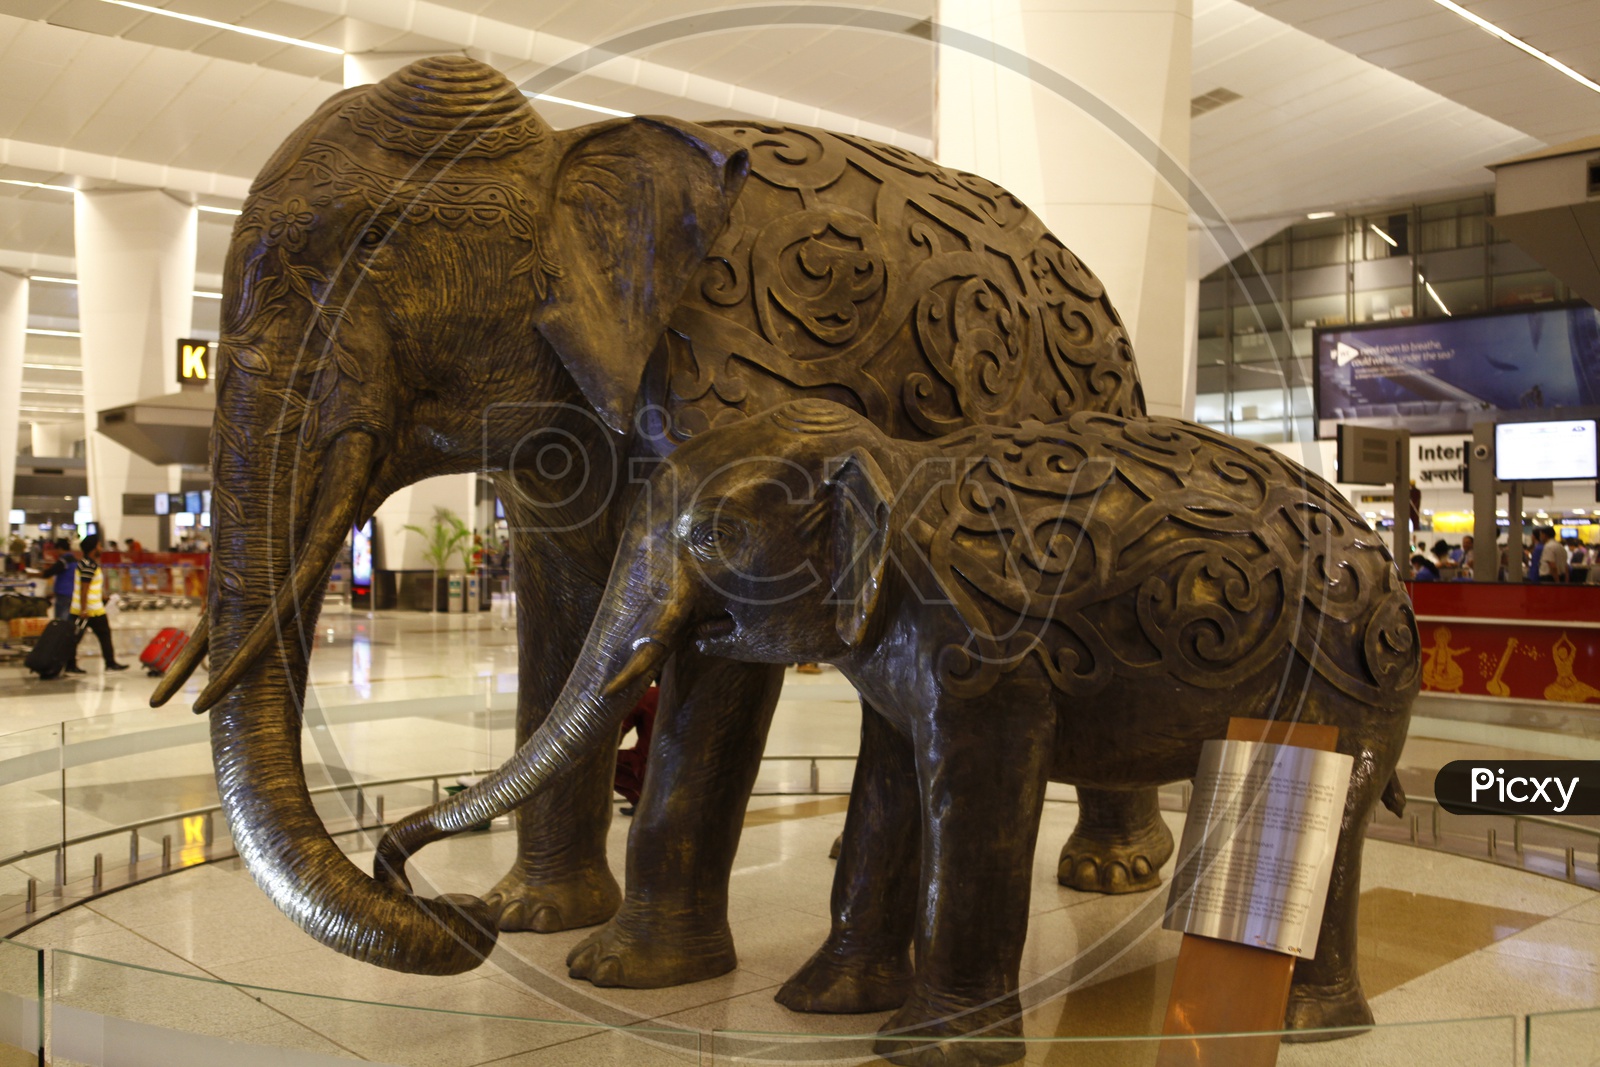 An Elephant and its baby sculpture in a airport